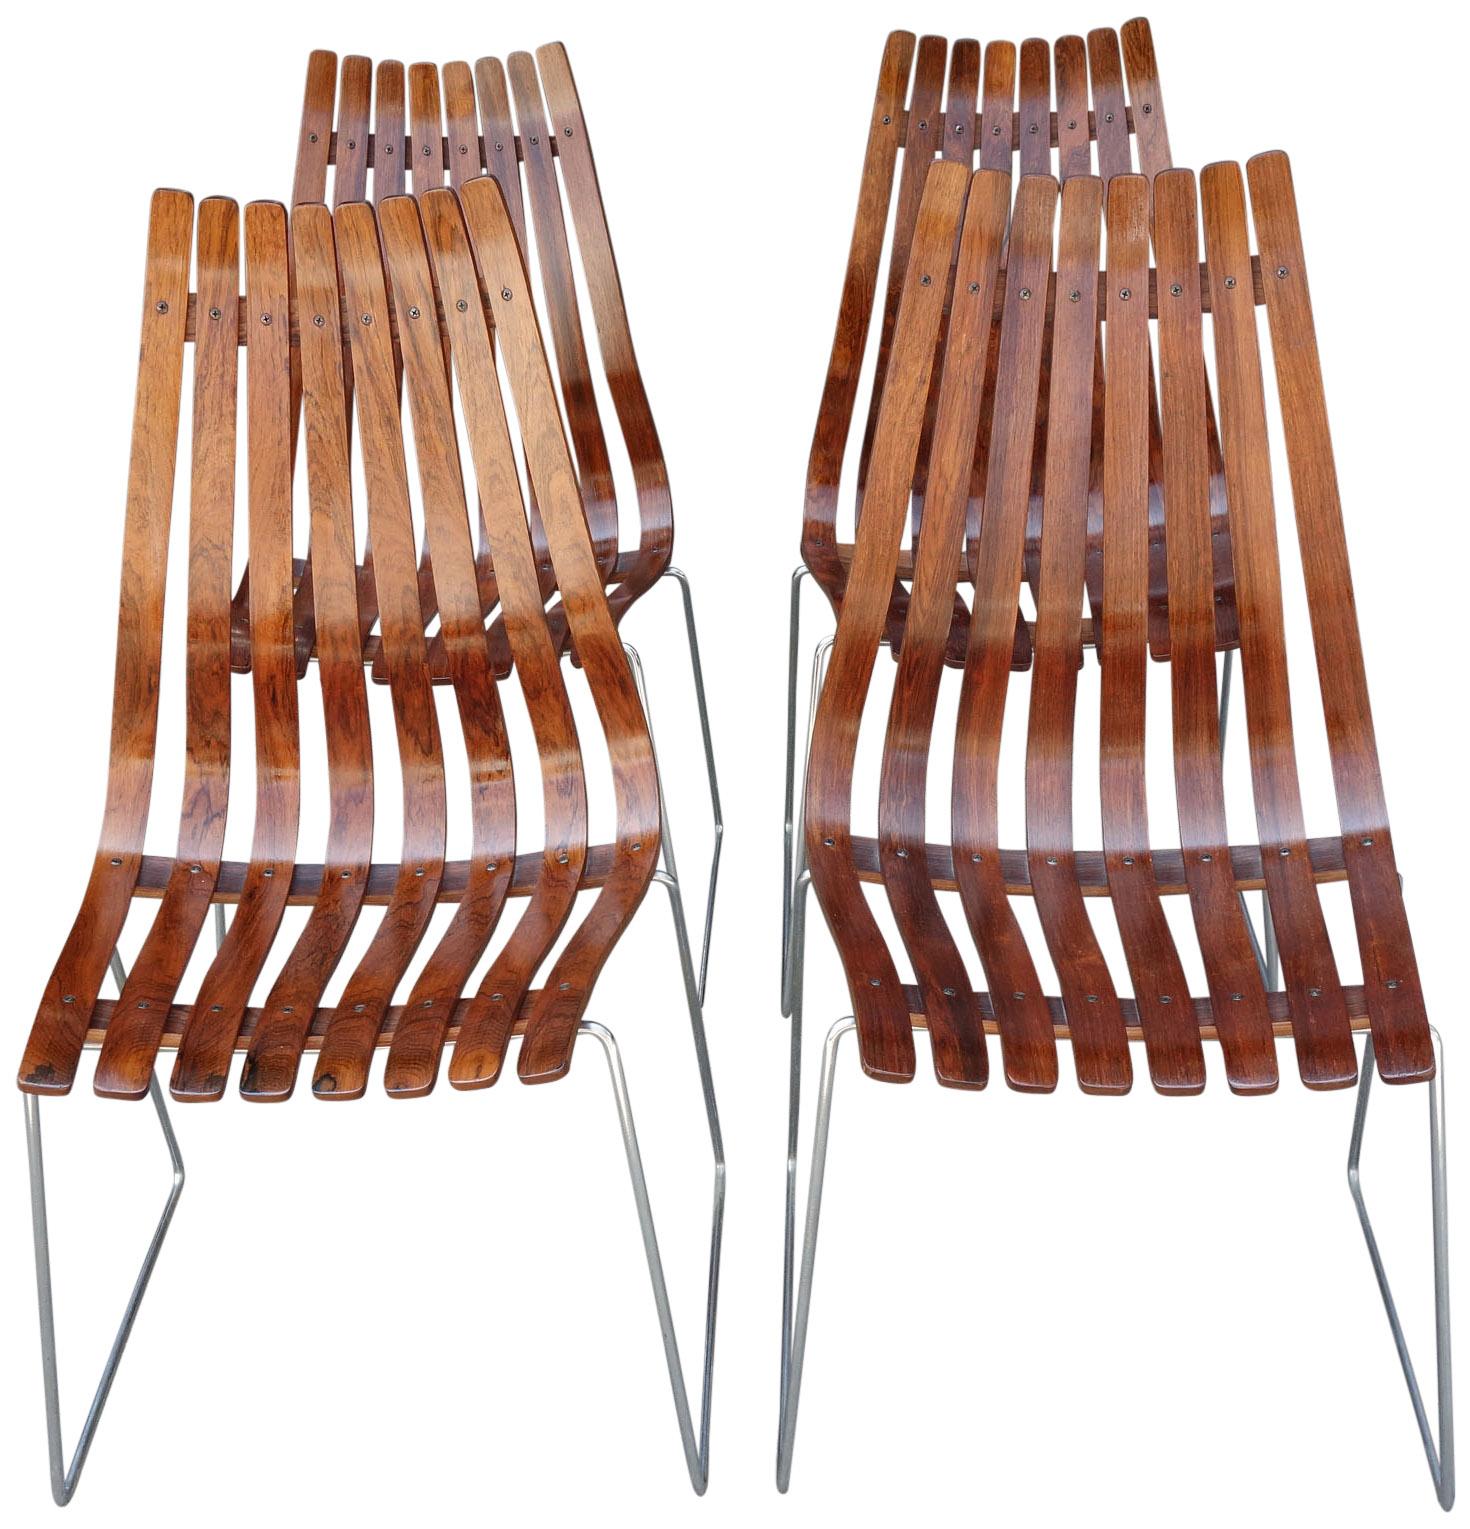 Chrome Midcentury Scandia Chairs by Hans Brattrud for Hove Mobler